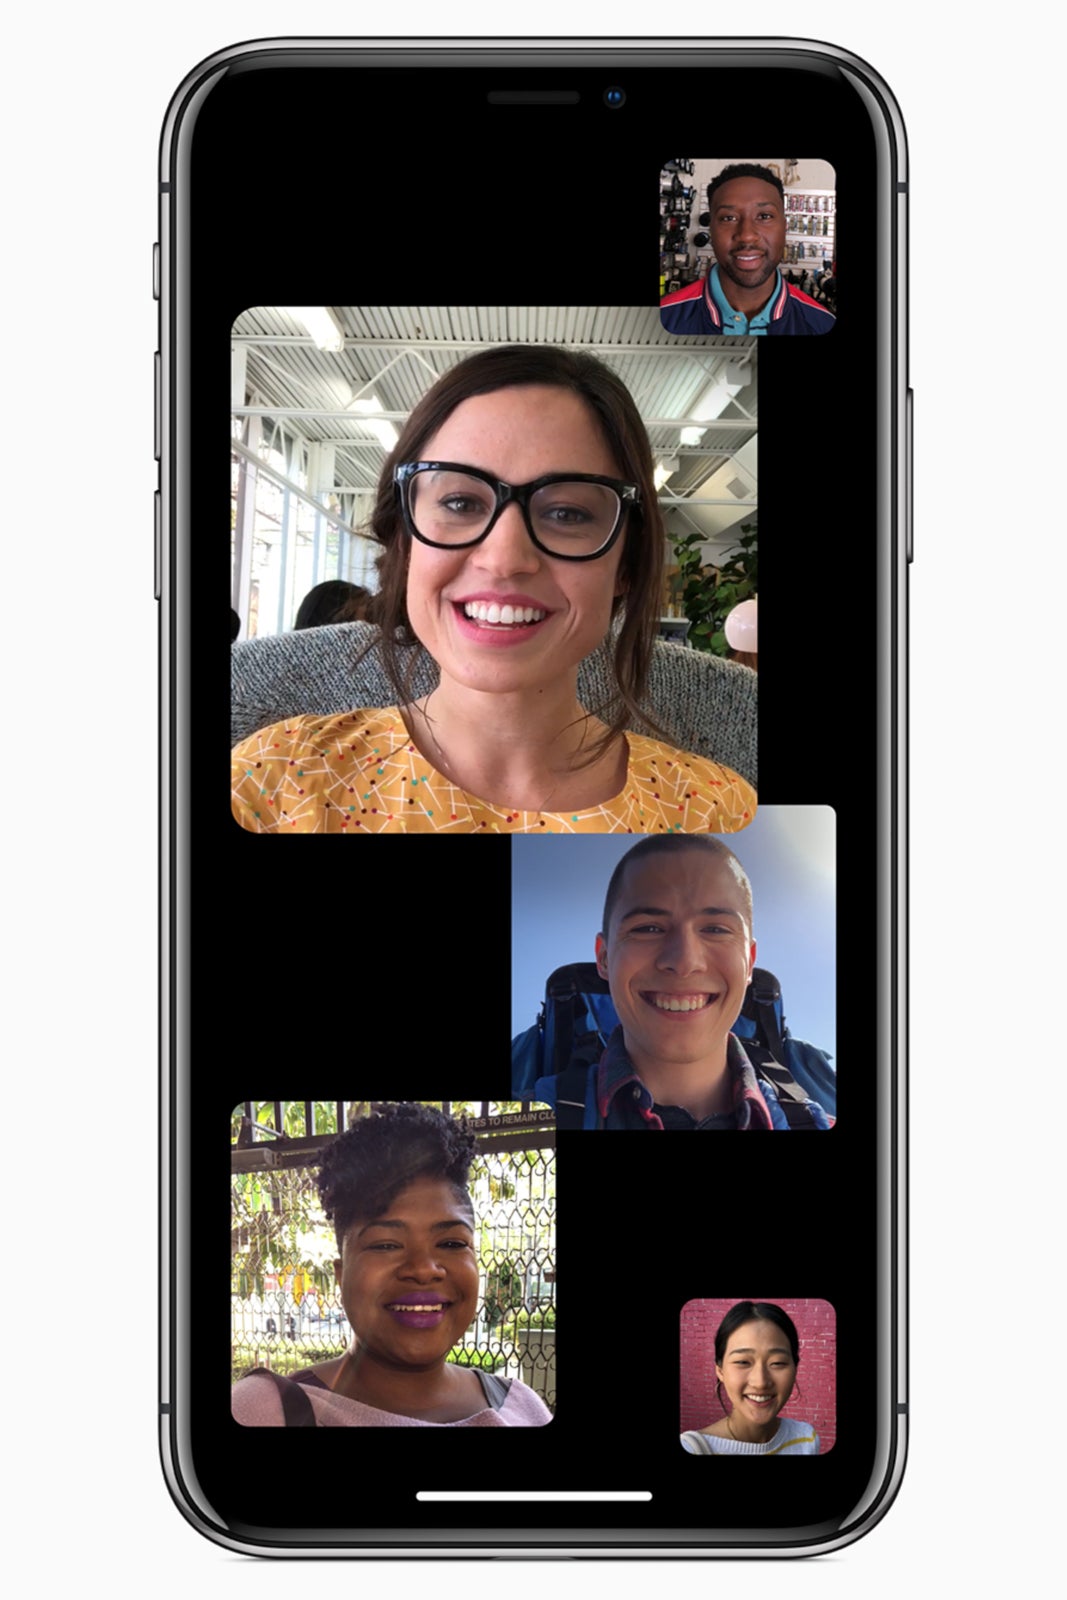 Apple's FaceTime gets a huge upgrade: video conferencing with up to 32 people